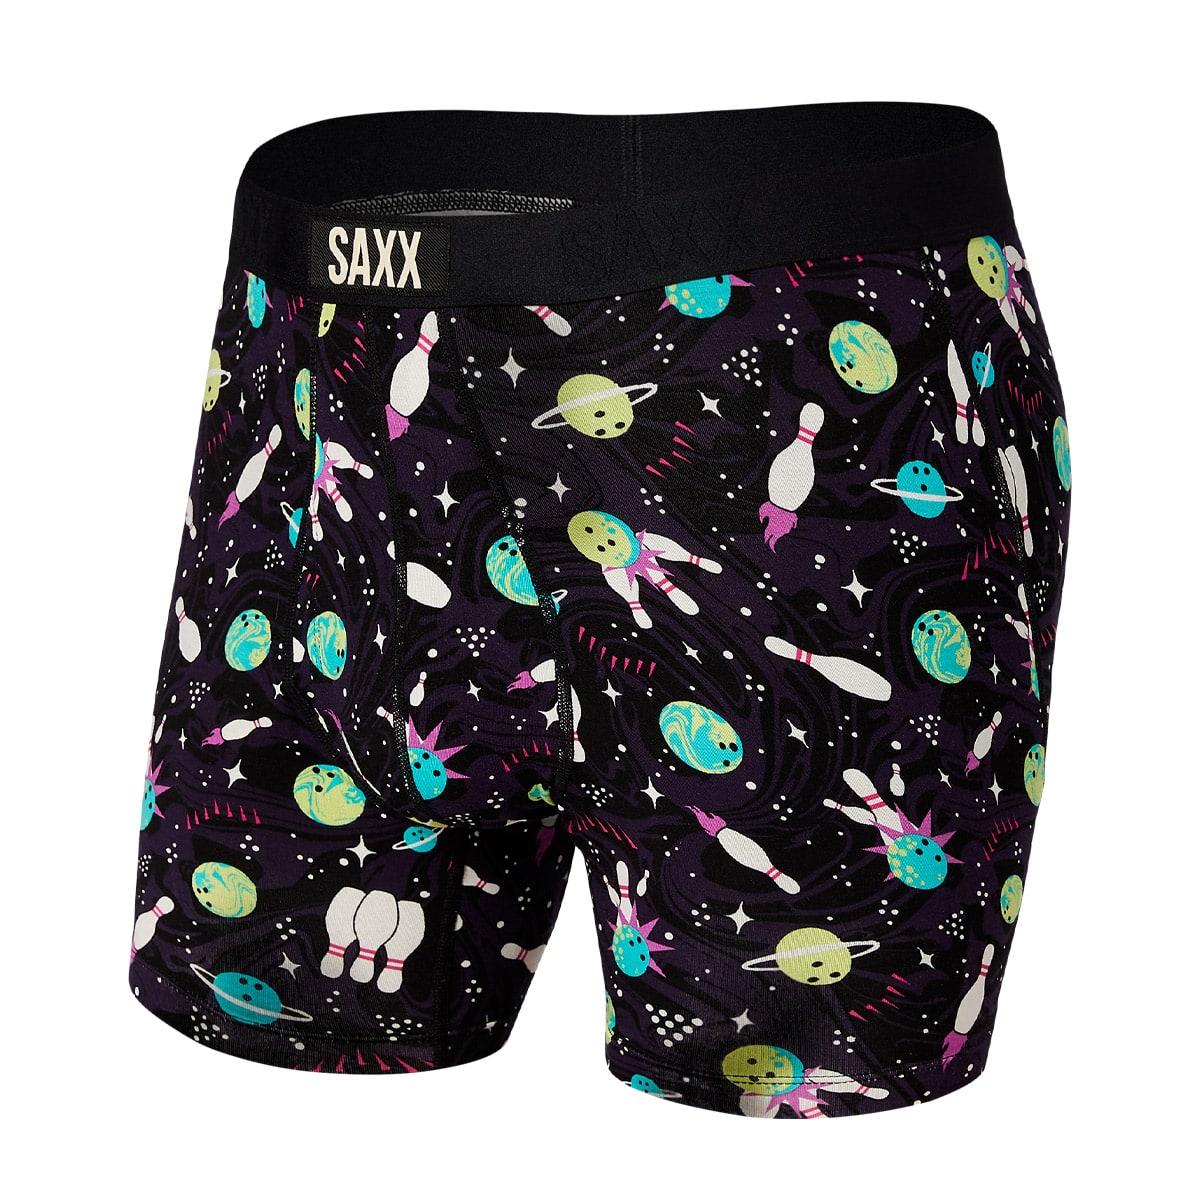 SAXX ULTRA BOXER BRIEF FLY BLACK COSMIC BOWLING 21FA-I_photo_large